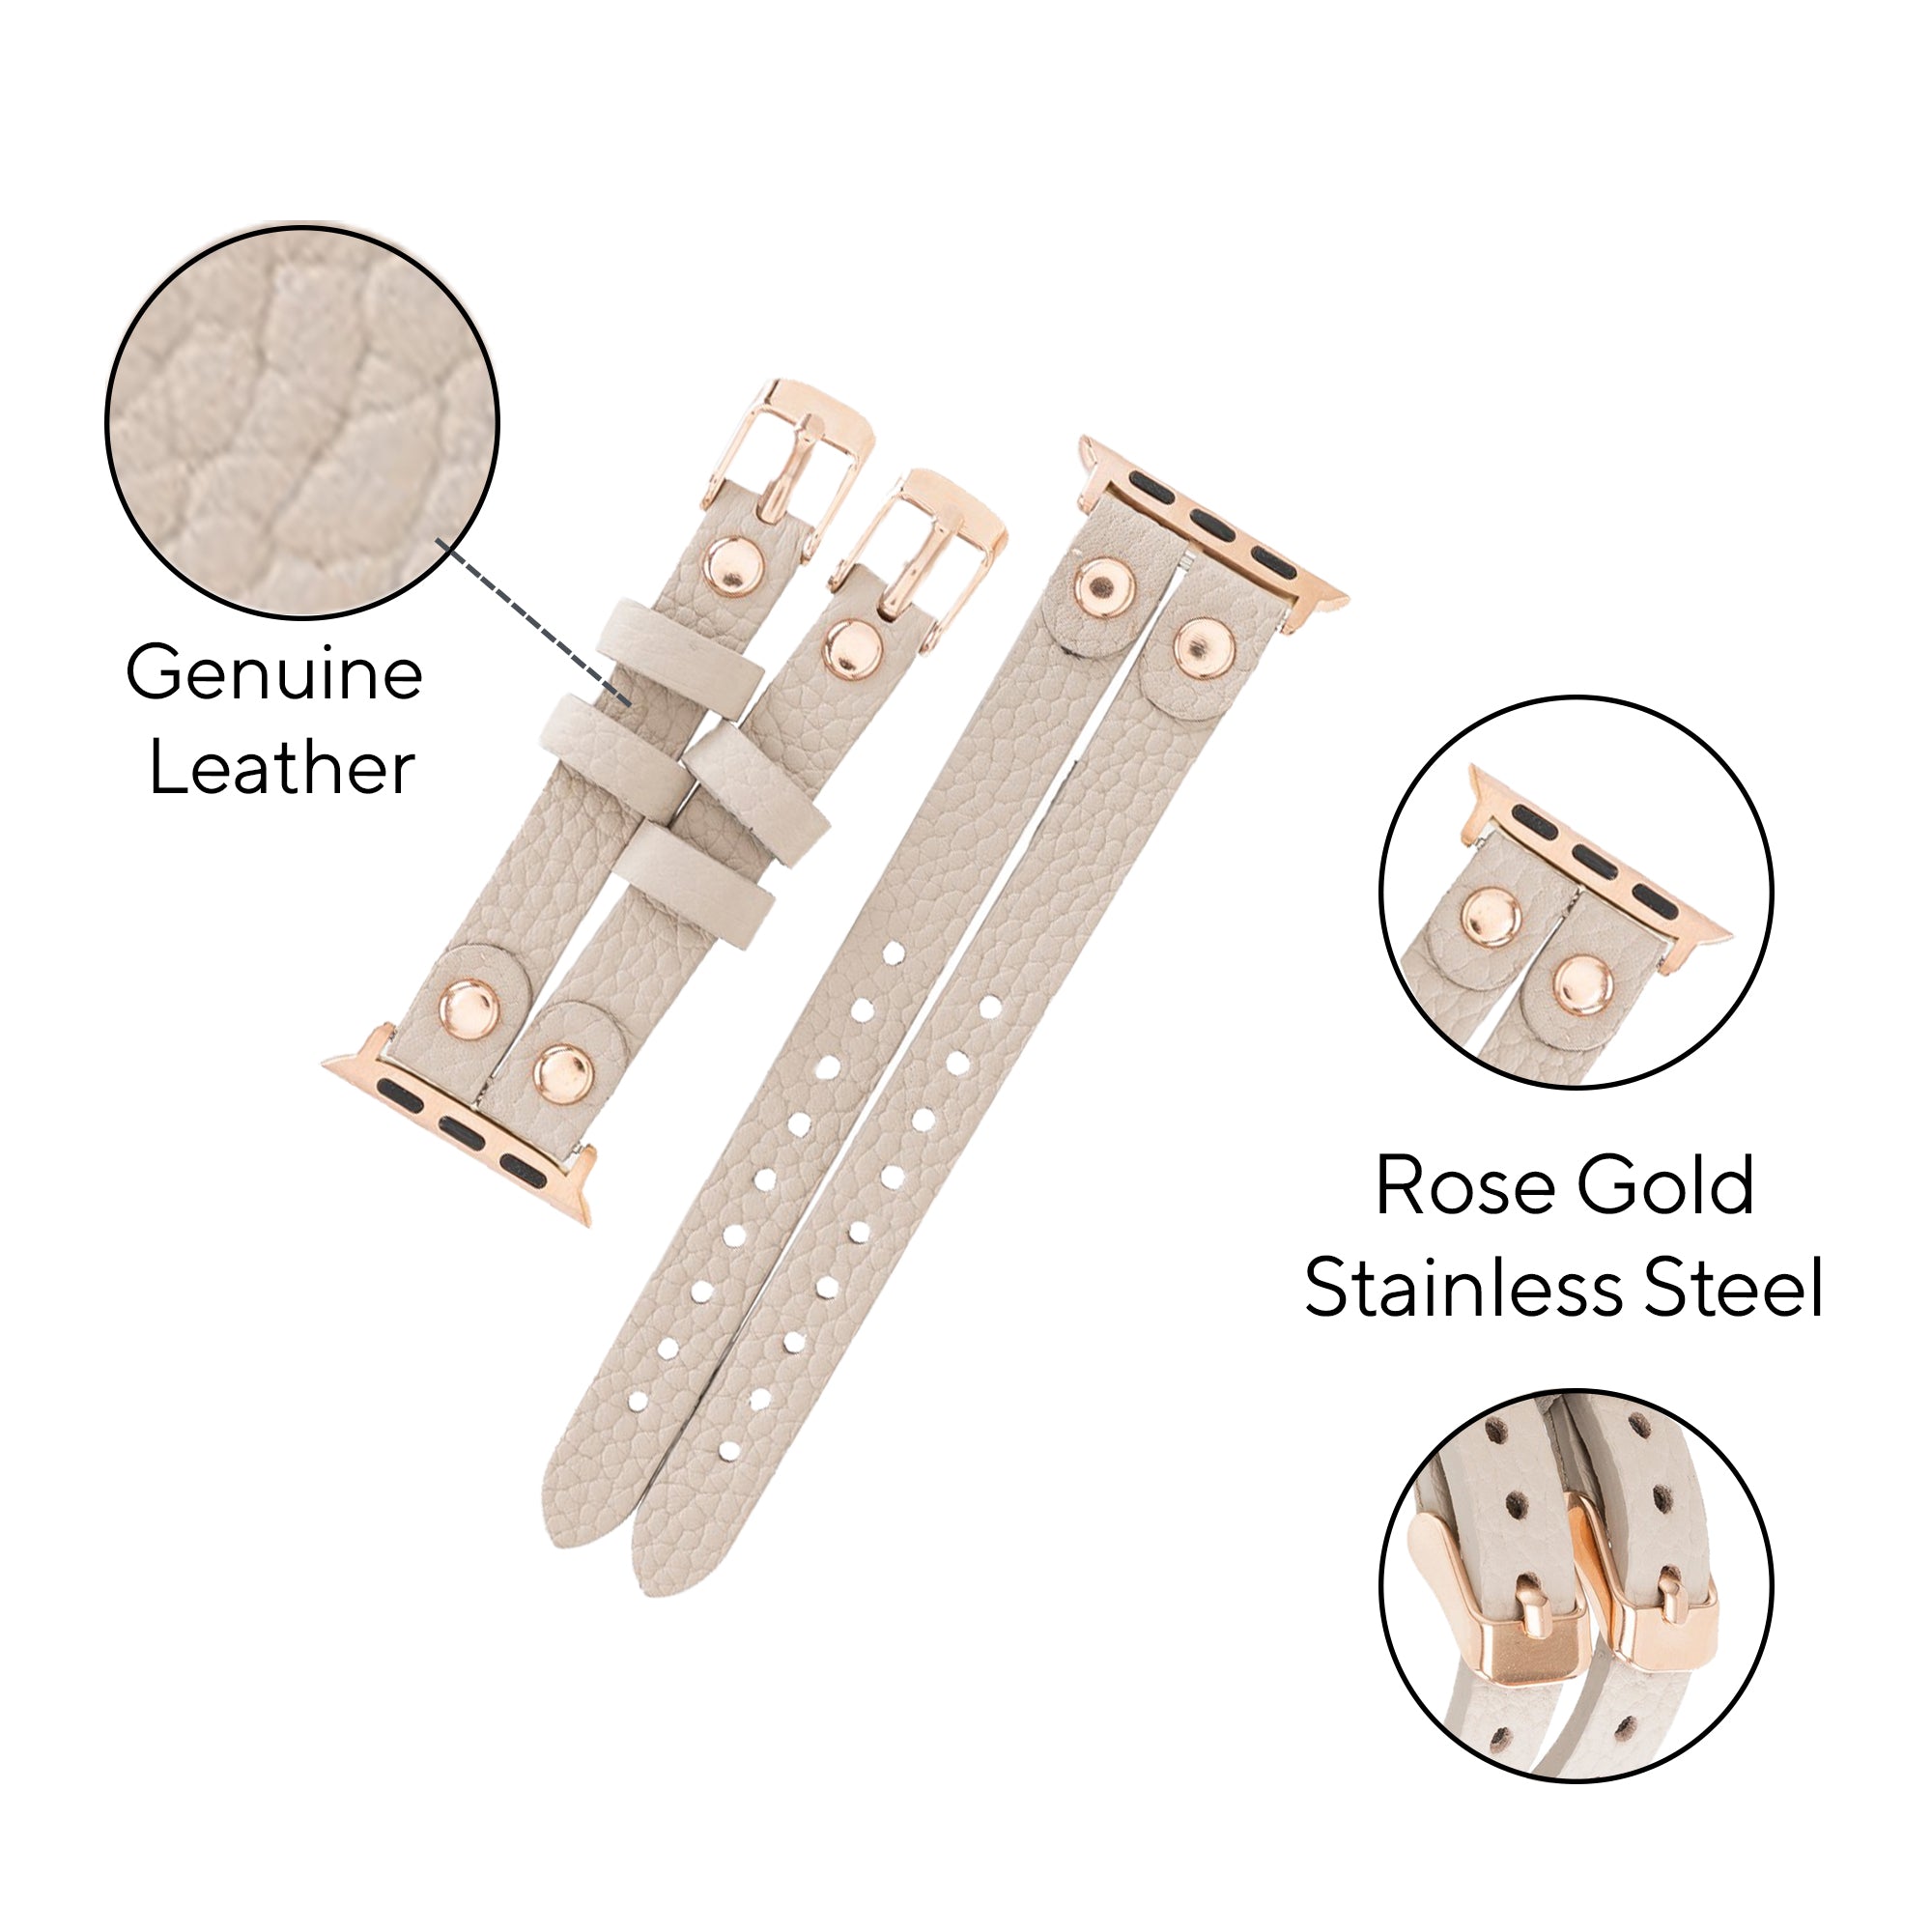 DelfiCase ELY Double Watch Band for Apple Watch and Fitbit Versa 3 2 & 1 (Beige) 3